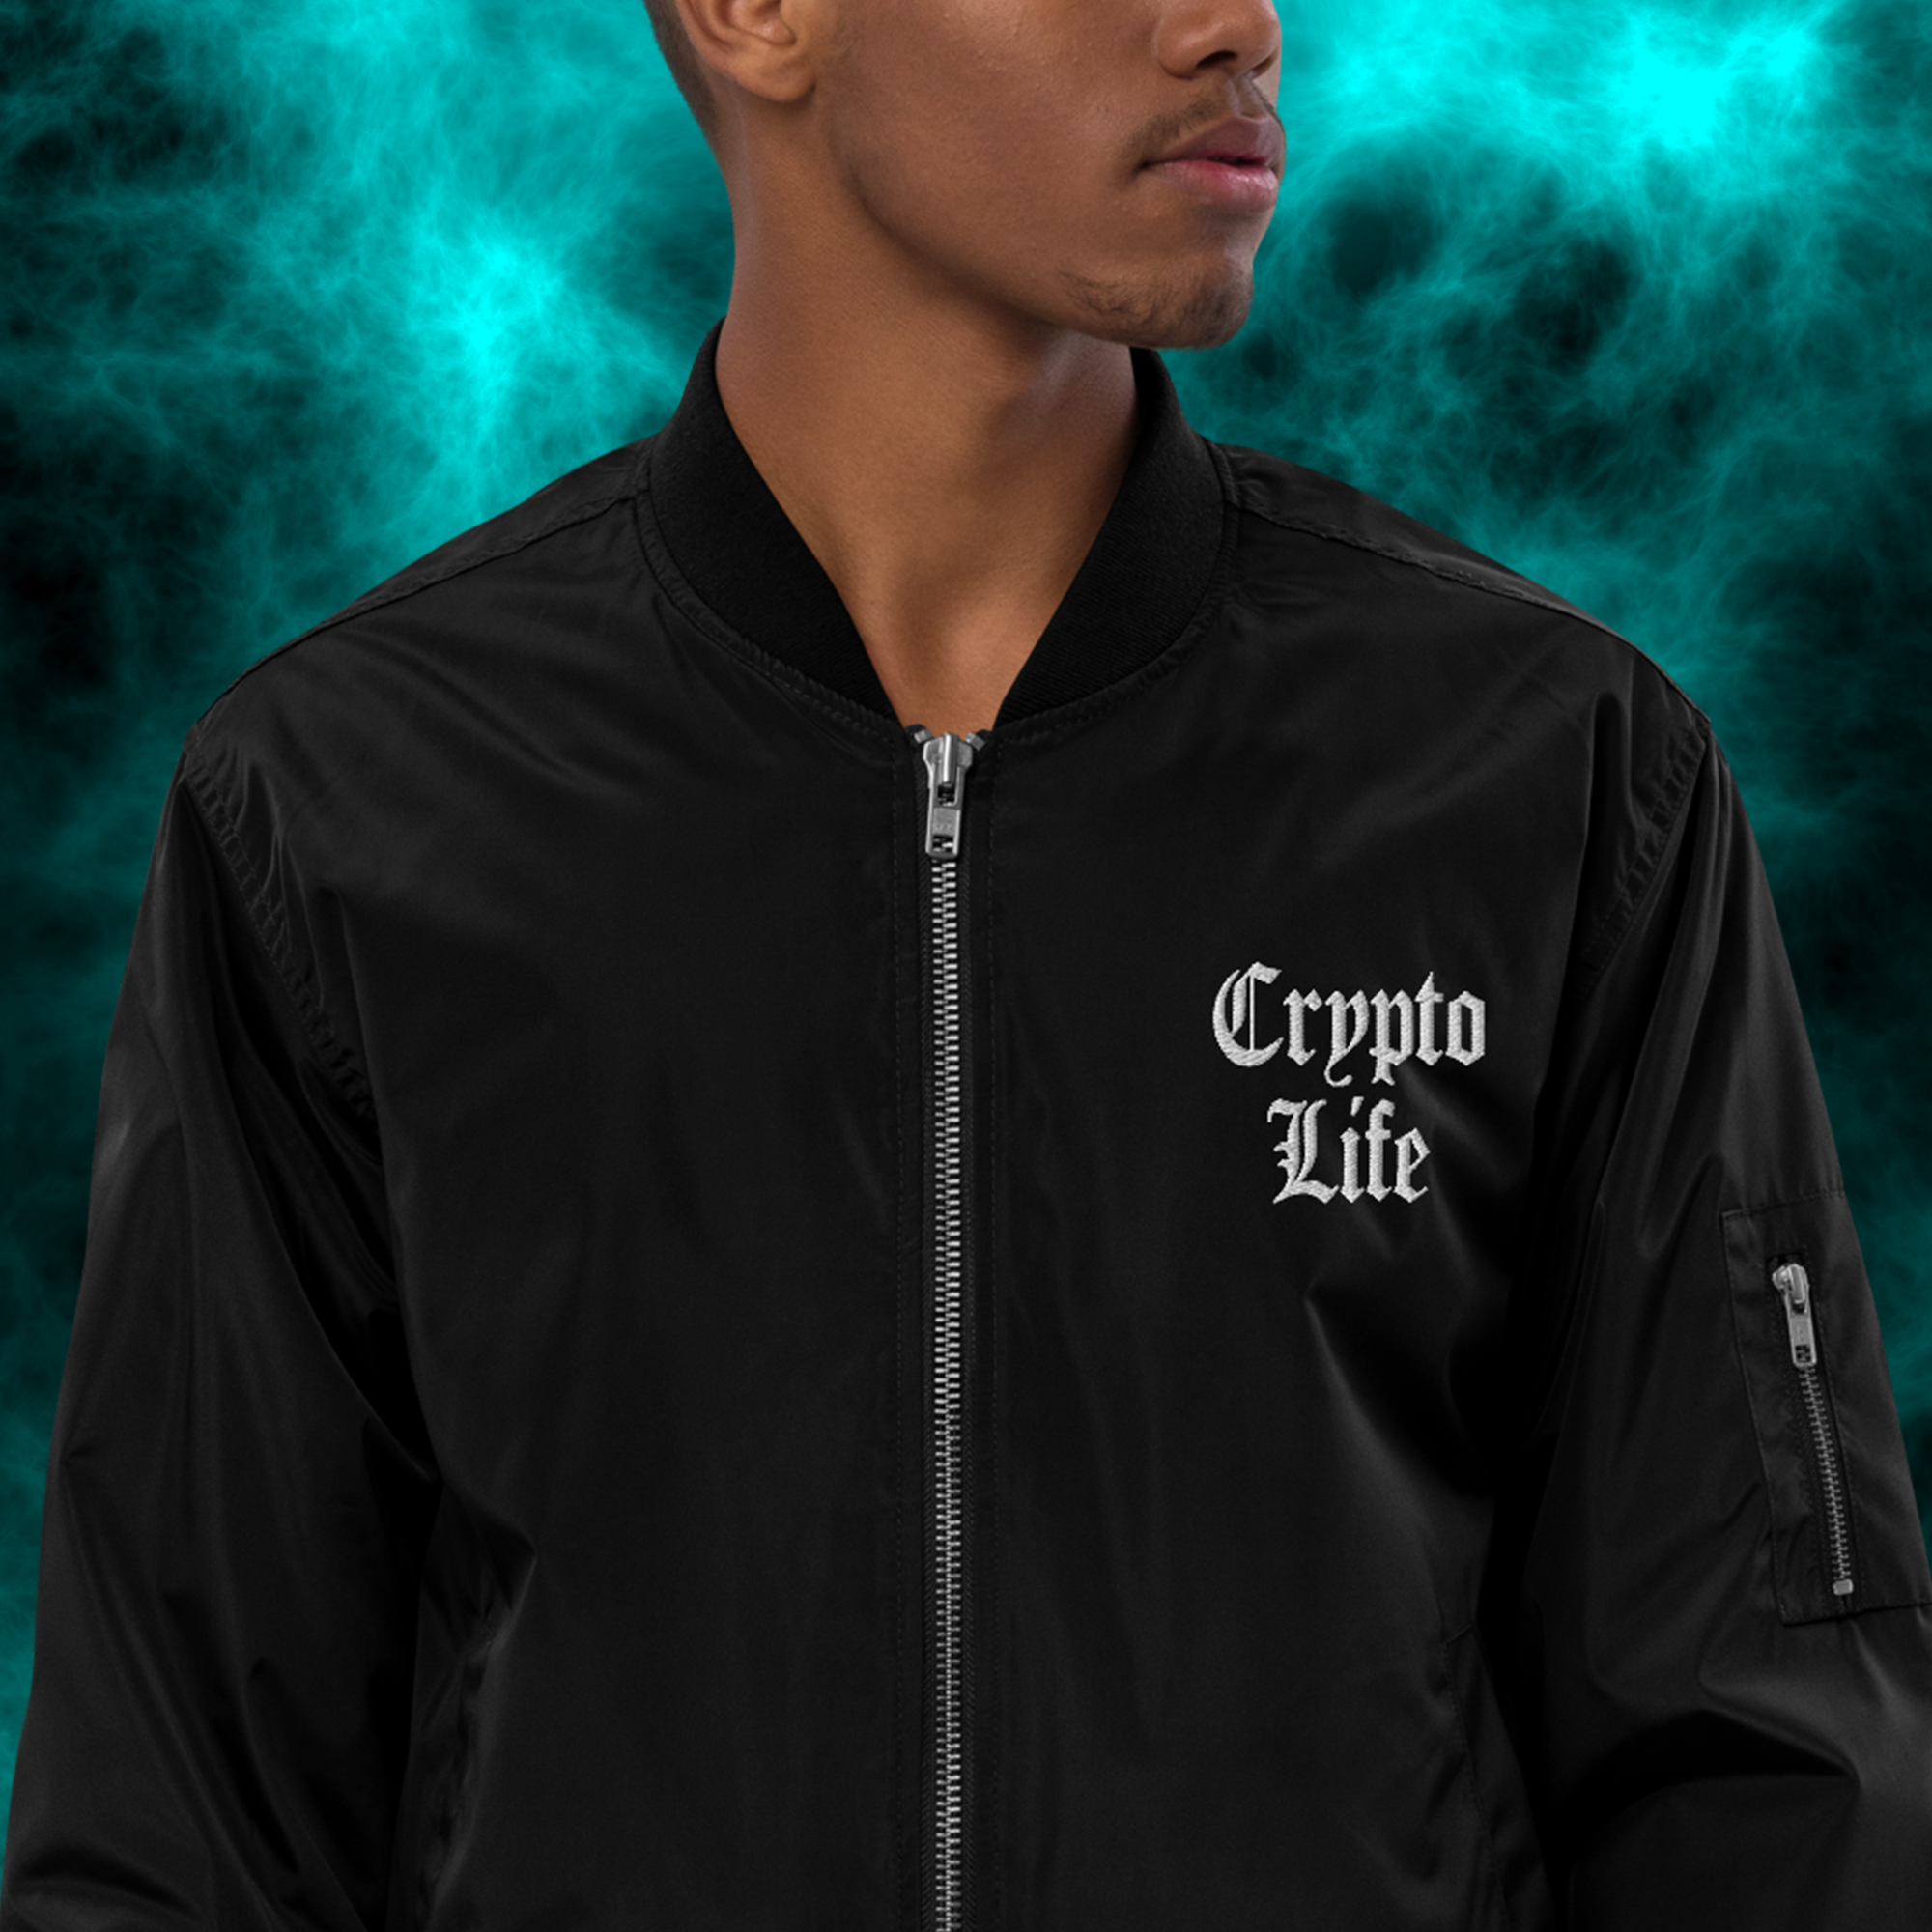 Crypto Clothing - Crypto Life Bomber Jacket worn by male model. Front view.